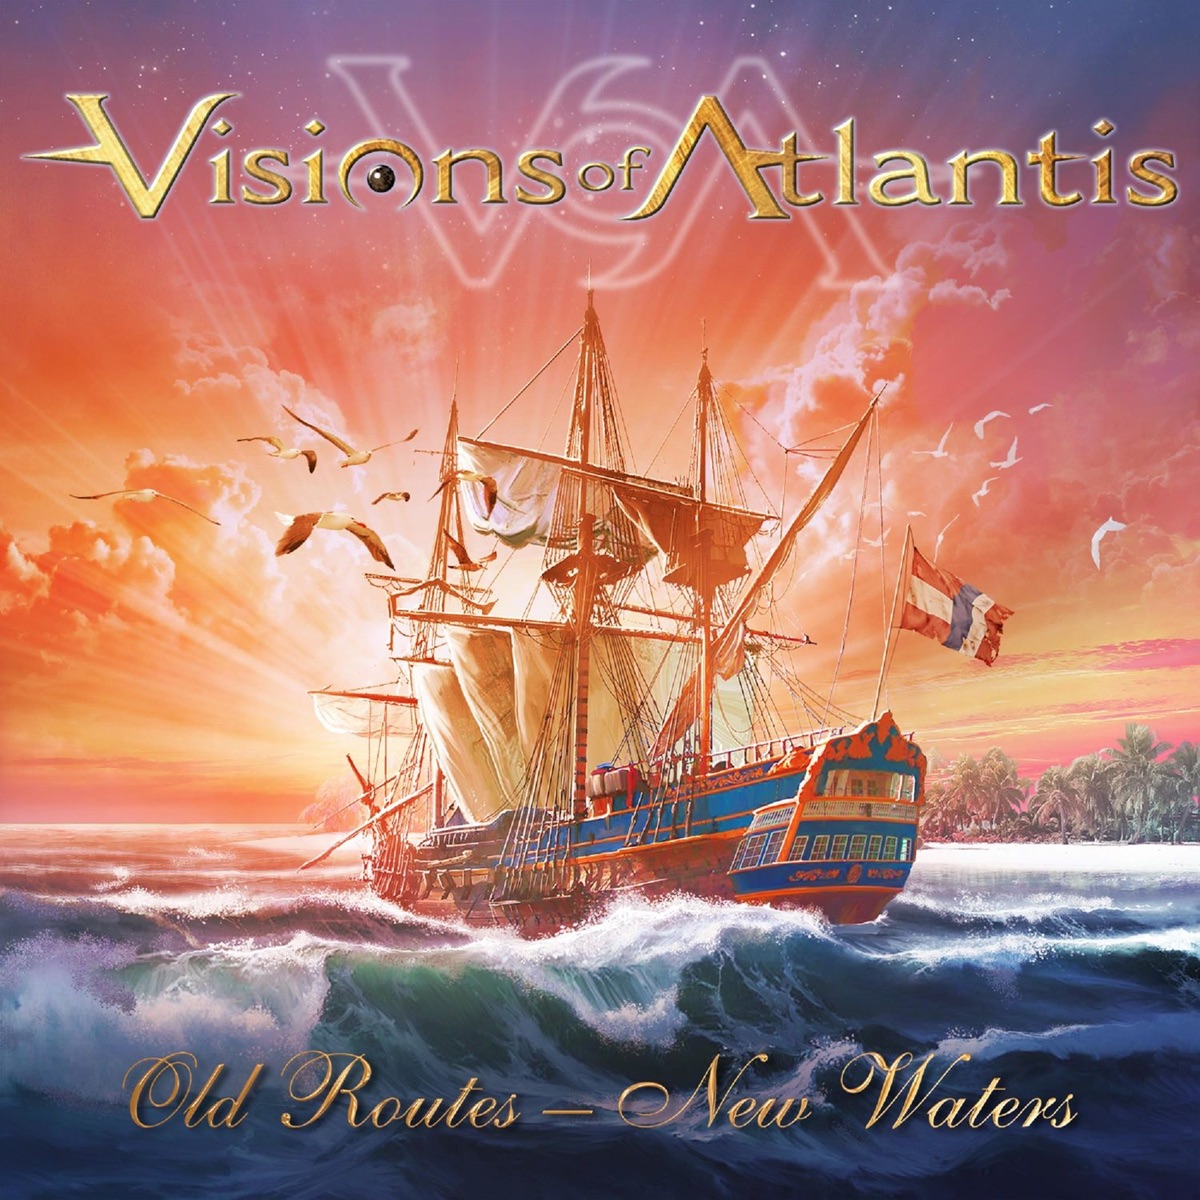 Old Routes / New Waters - EP by Visions of Atlantis on Apple Music